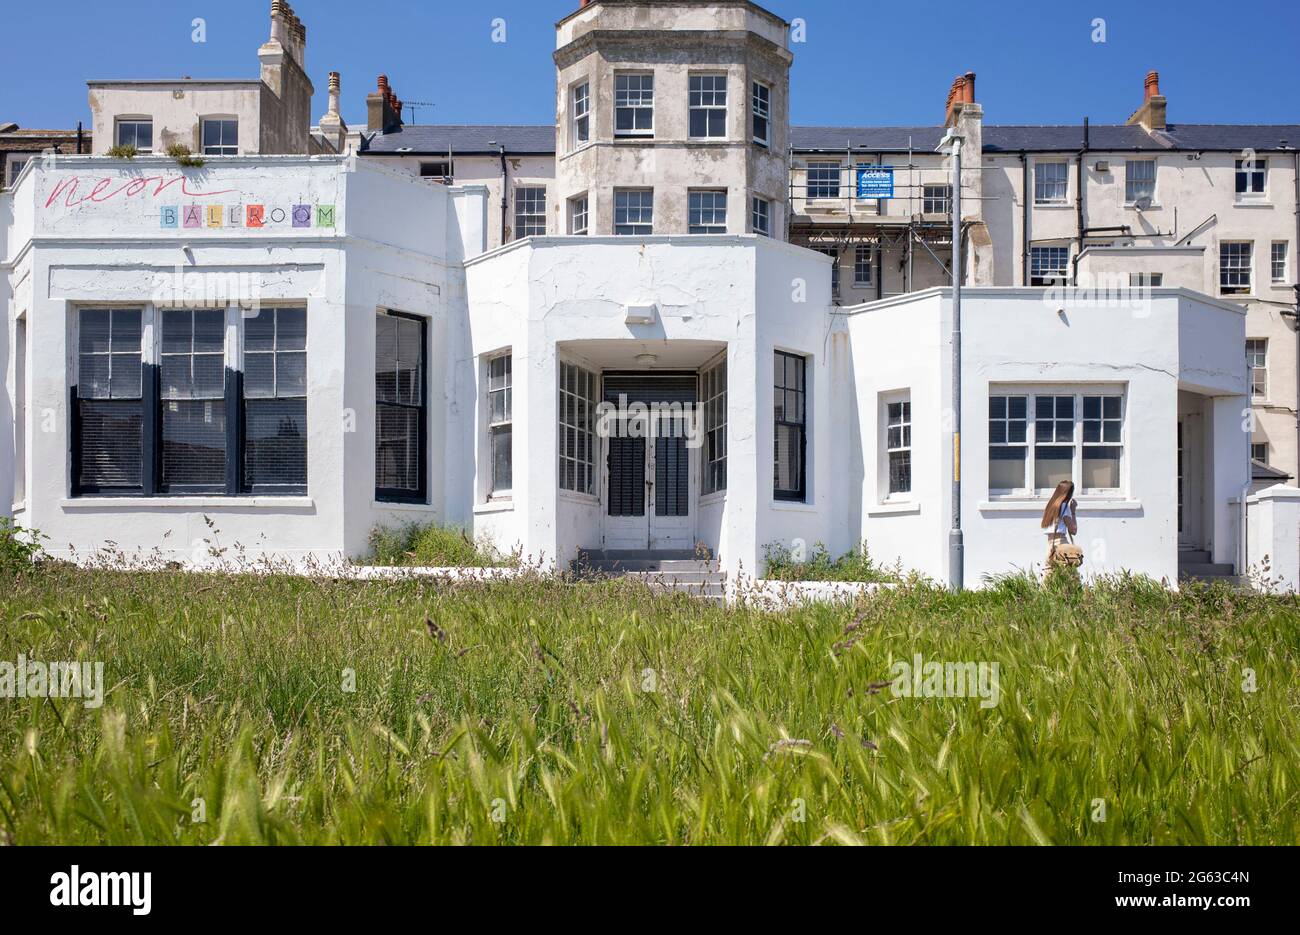 Front view of  Neon Ballroom (formerly Club Caprice) in Margate Kent England UK Stock Photo